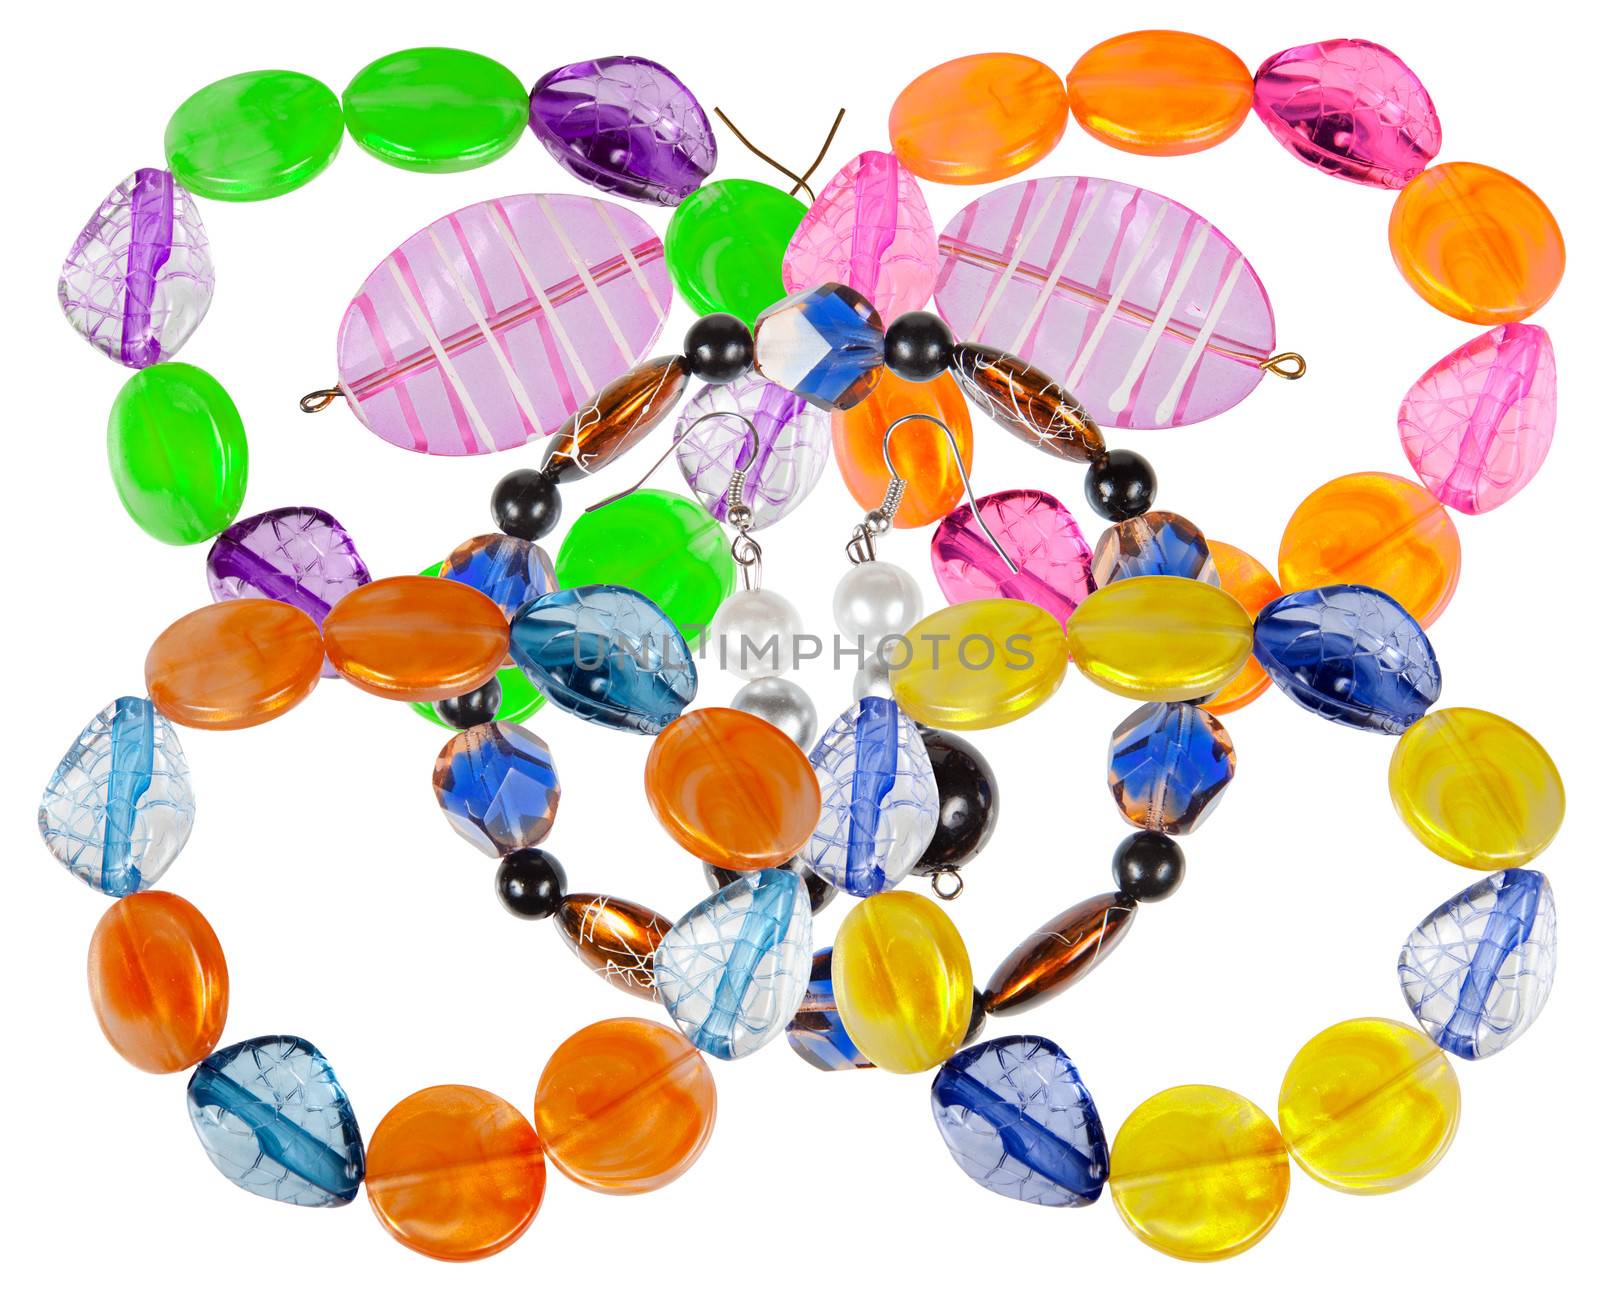 Bracelets and earrings made of handmade glass isolated on white background. collage